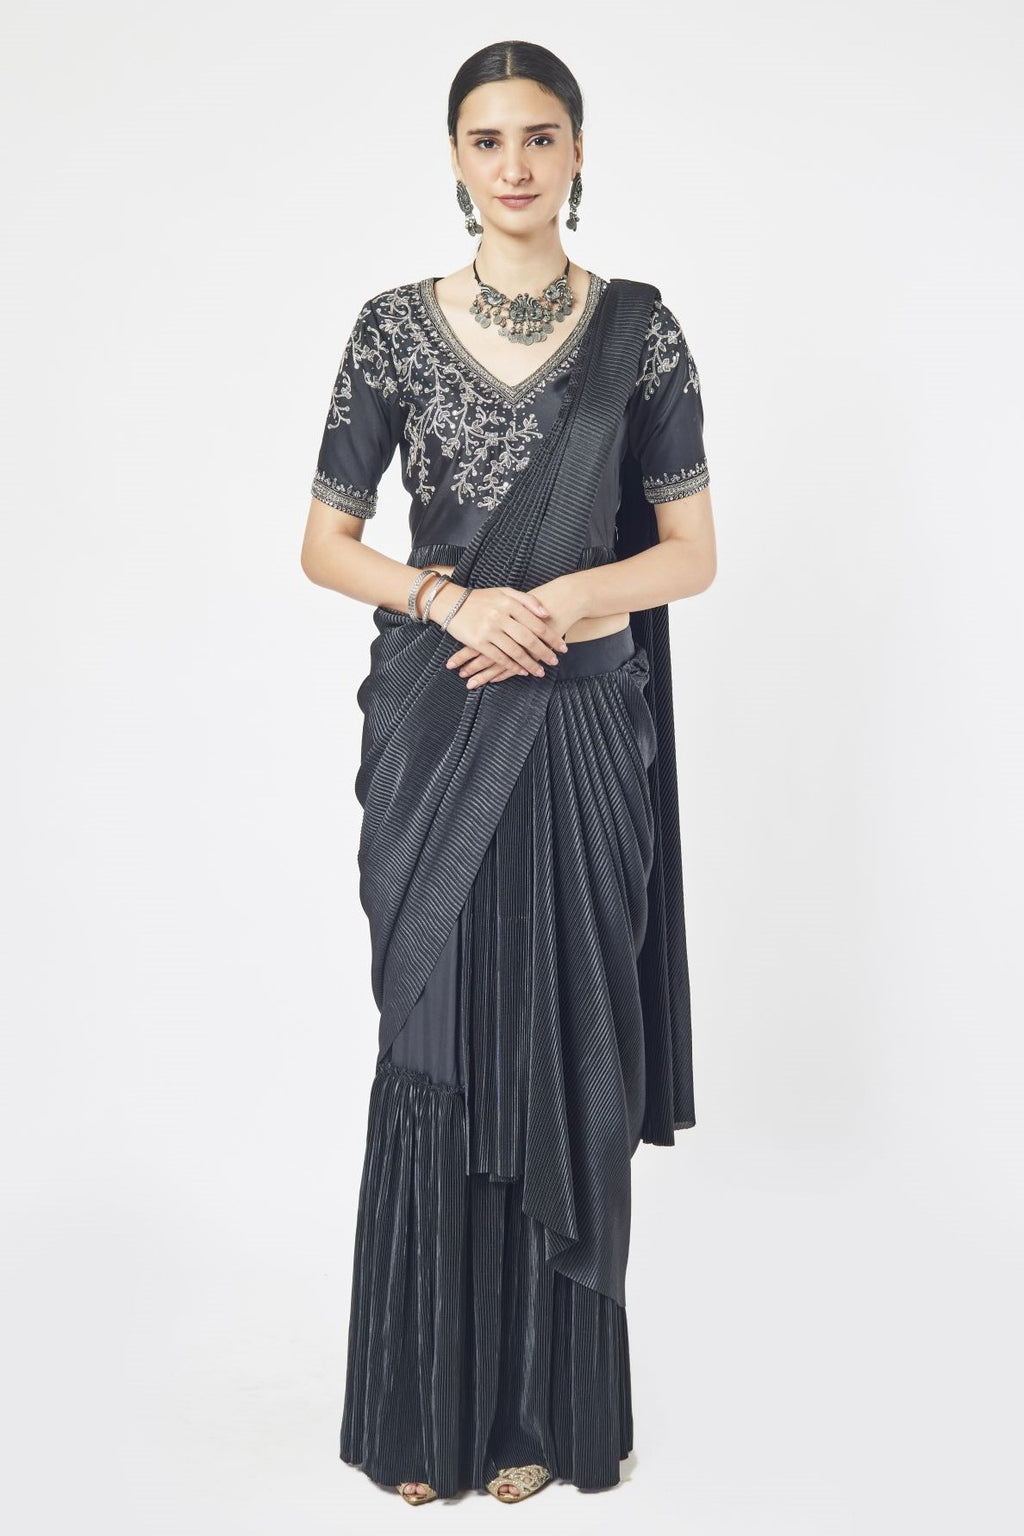 Shop a black drape saree with mirror and cutdana work. Make a fashion statement on festive occasions and weddings with designer sarees, designer suits, Indian dresses, Anarkali suits, palazzo suits, designer gowns, sharara suits, and embroidered sarees from Pure Elegance Indian fashion store in the USA.